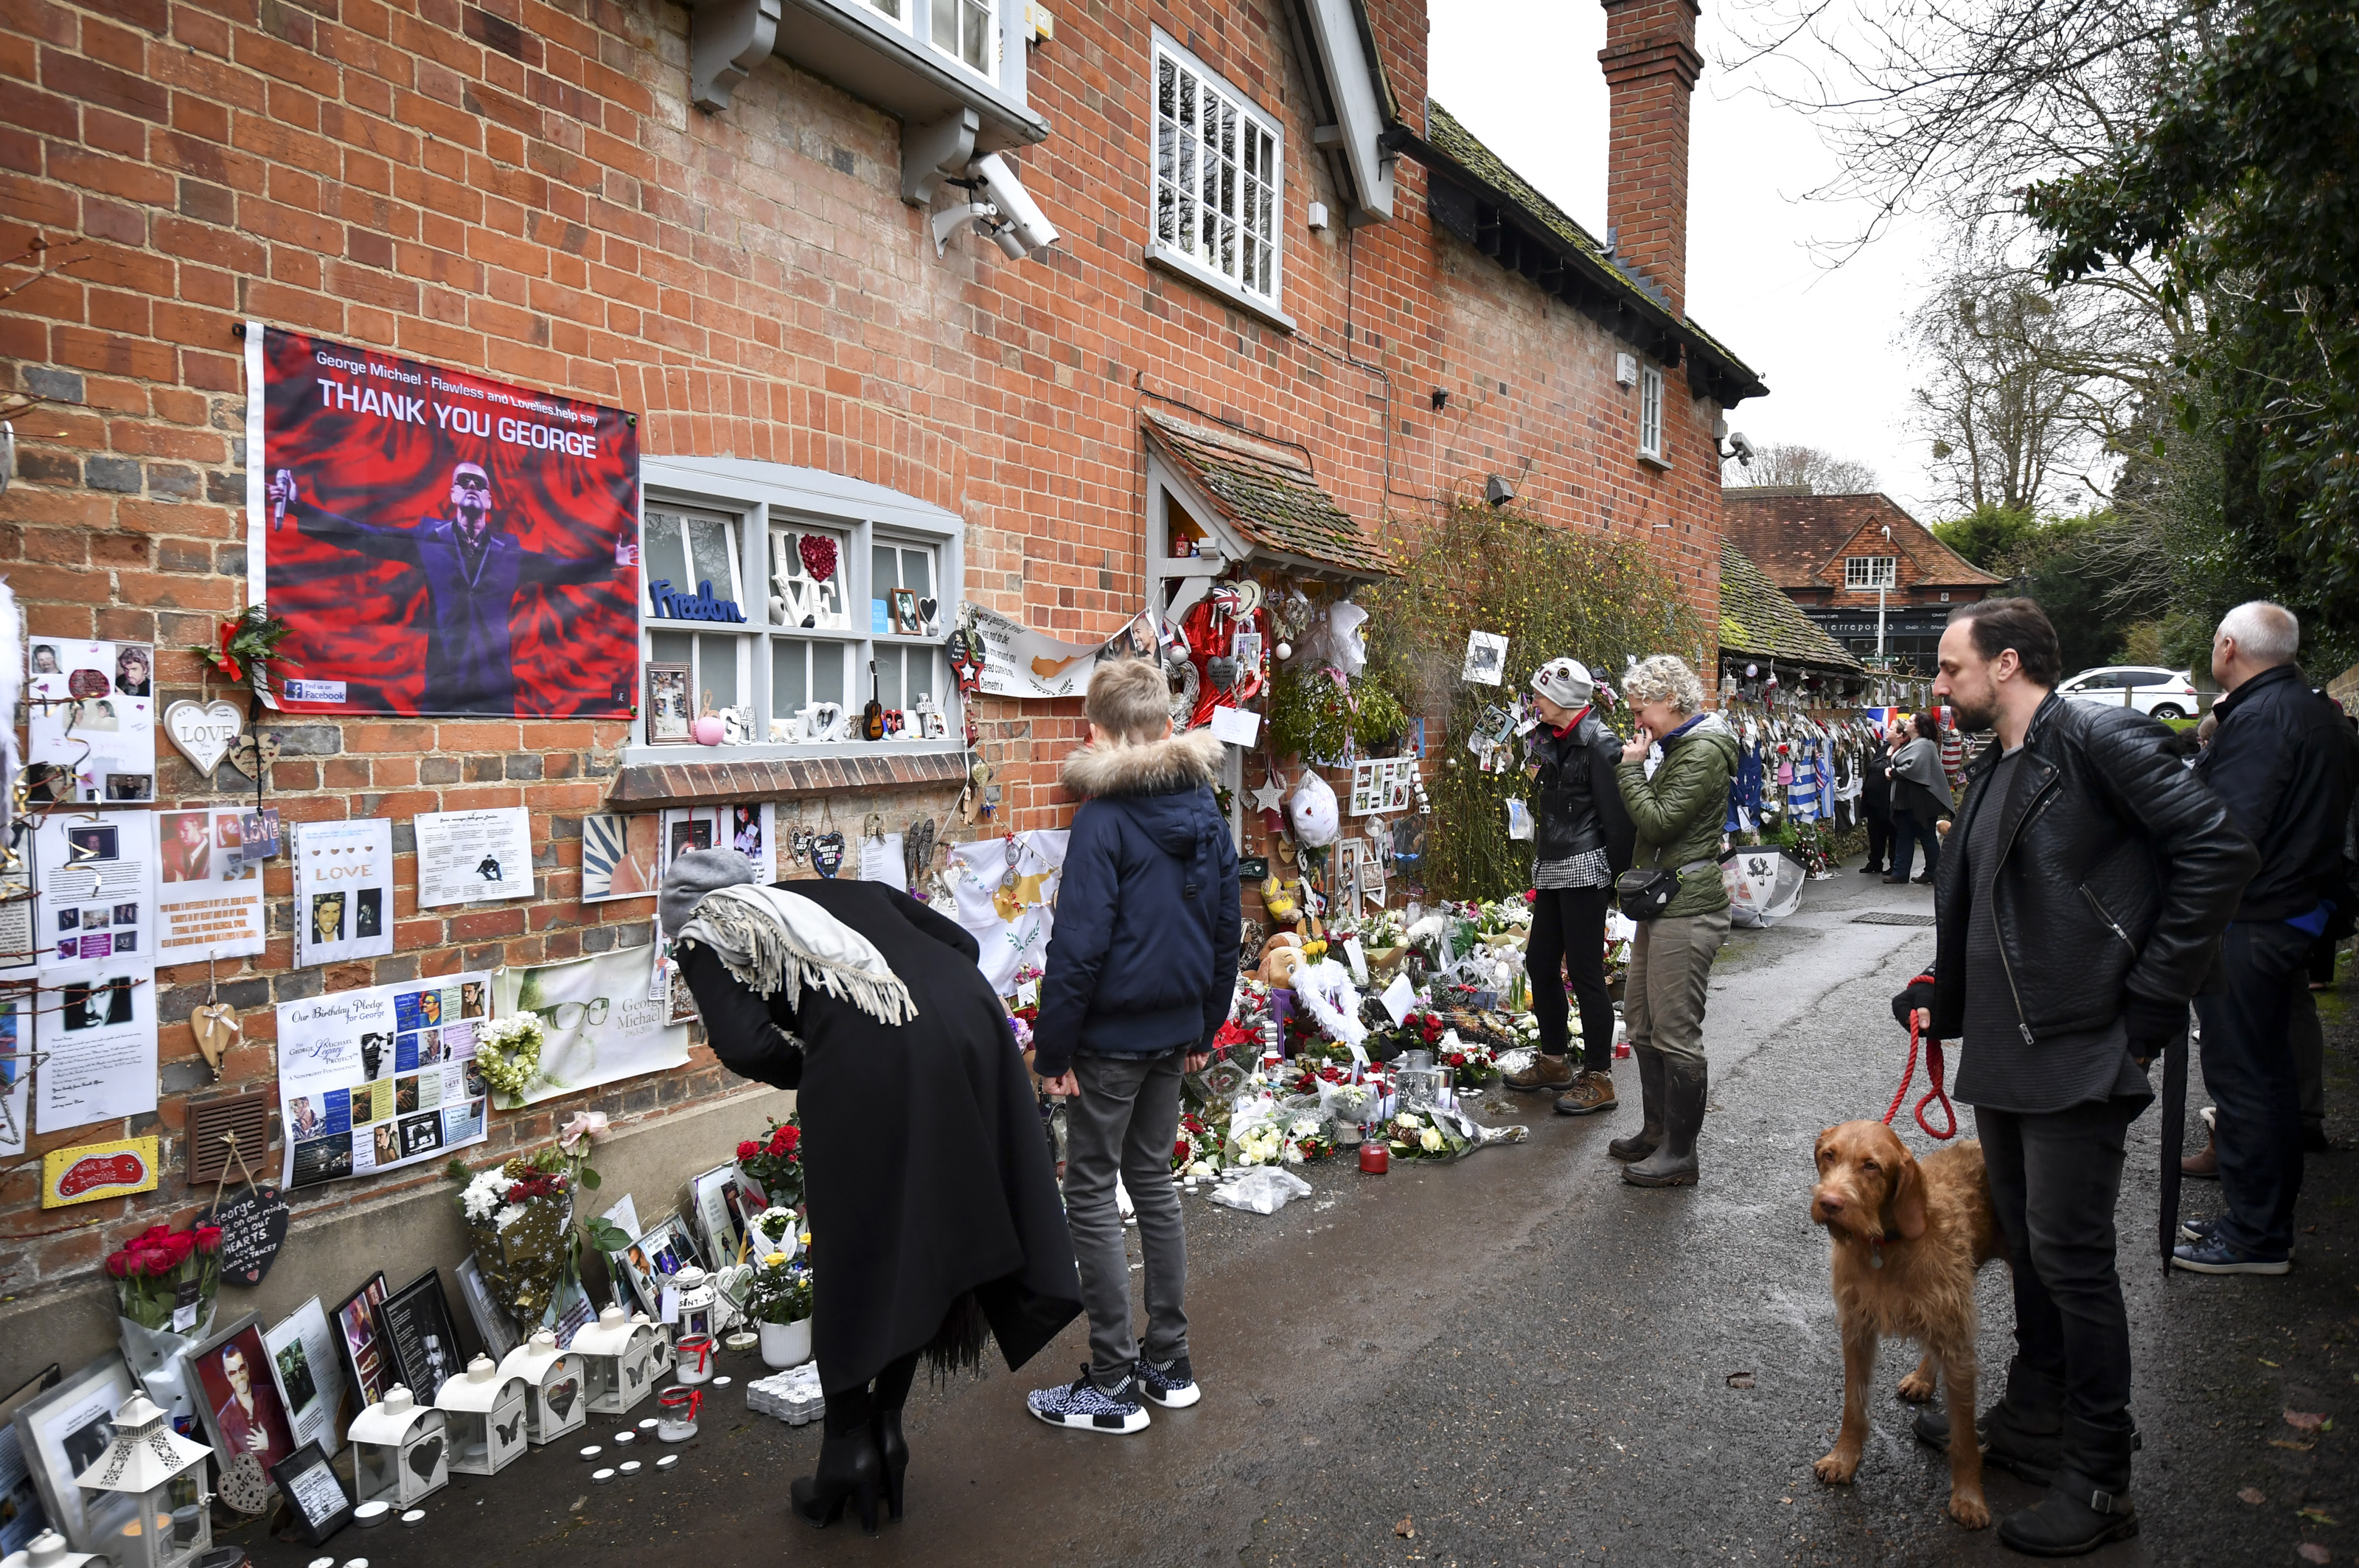 Well-wishers gathered outside the home and left hundreds of tributes following his death